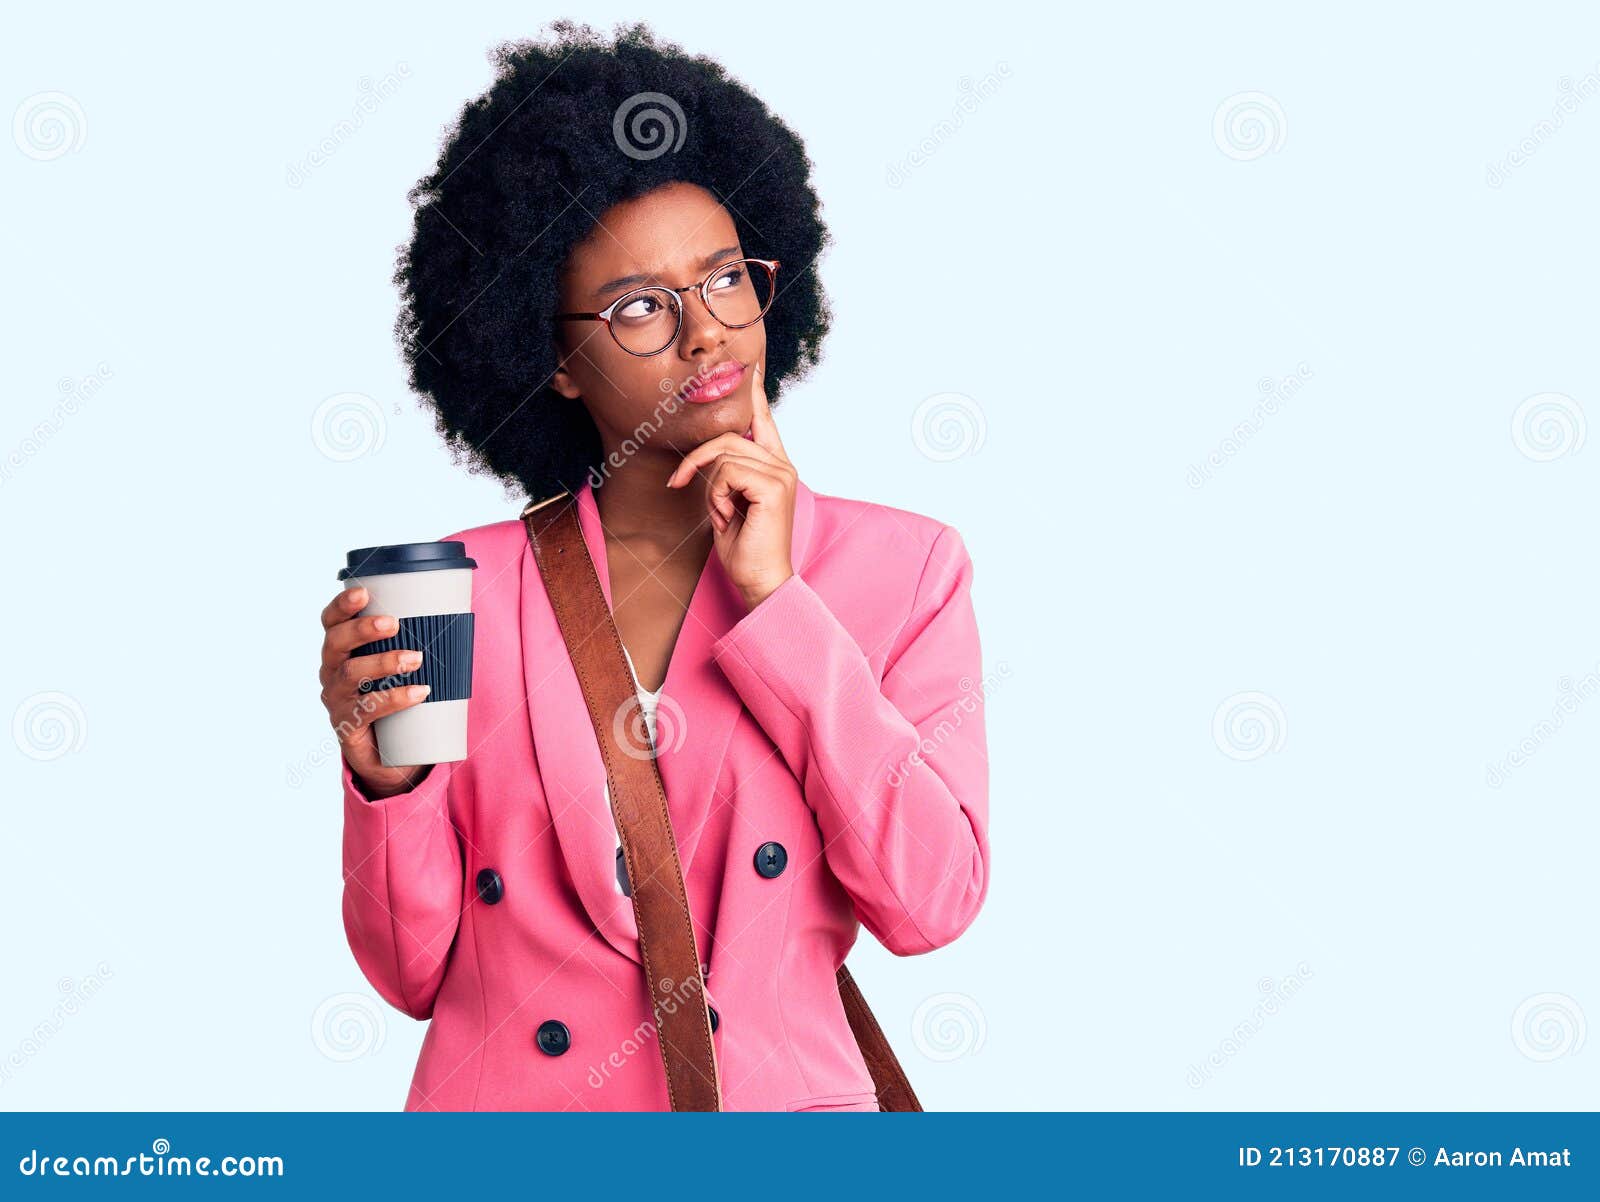 Young African American Woman Wearing Leather Bag and Drinking a Take ...